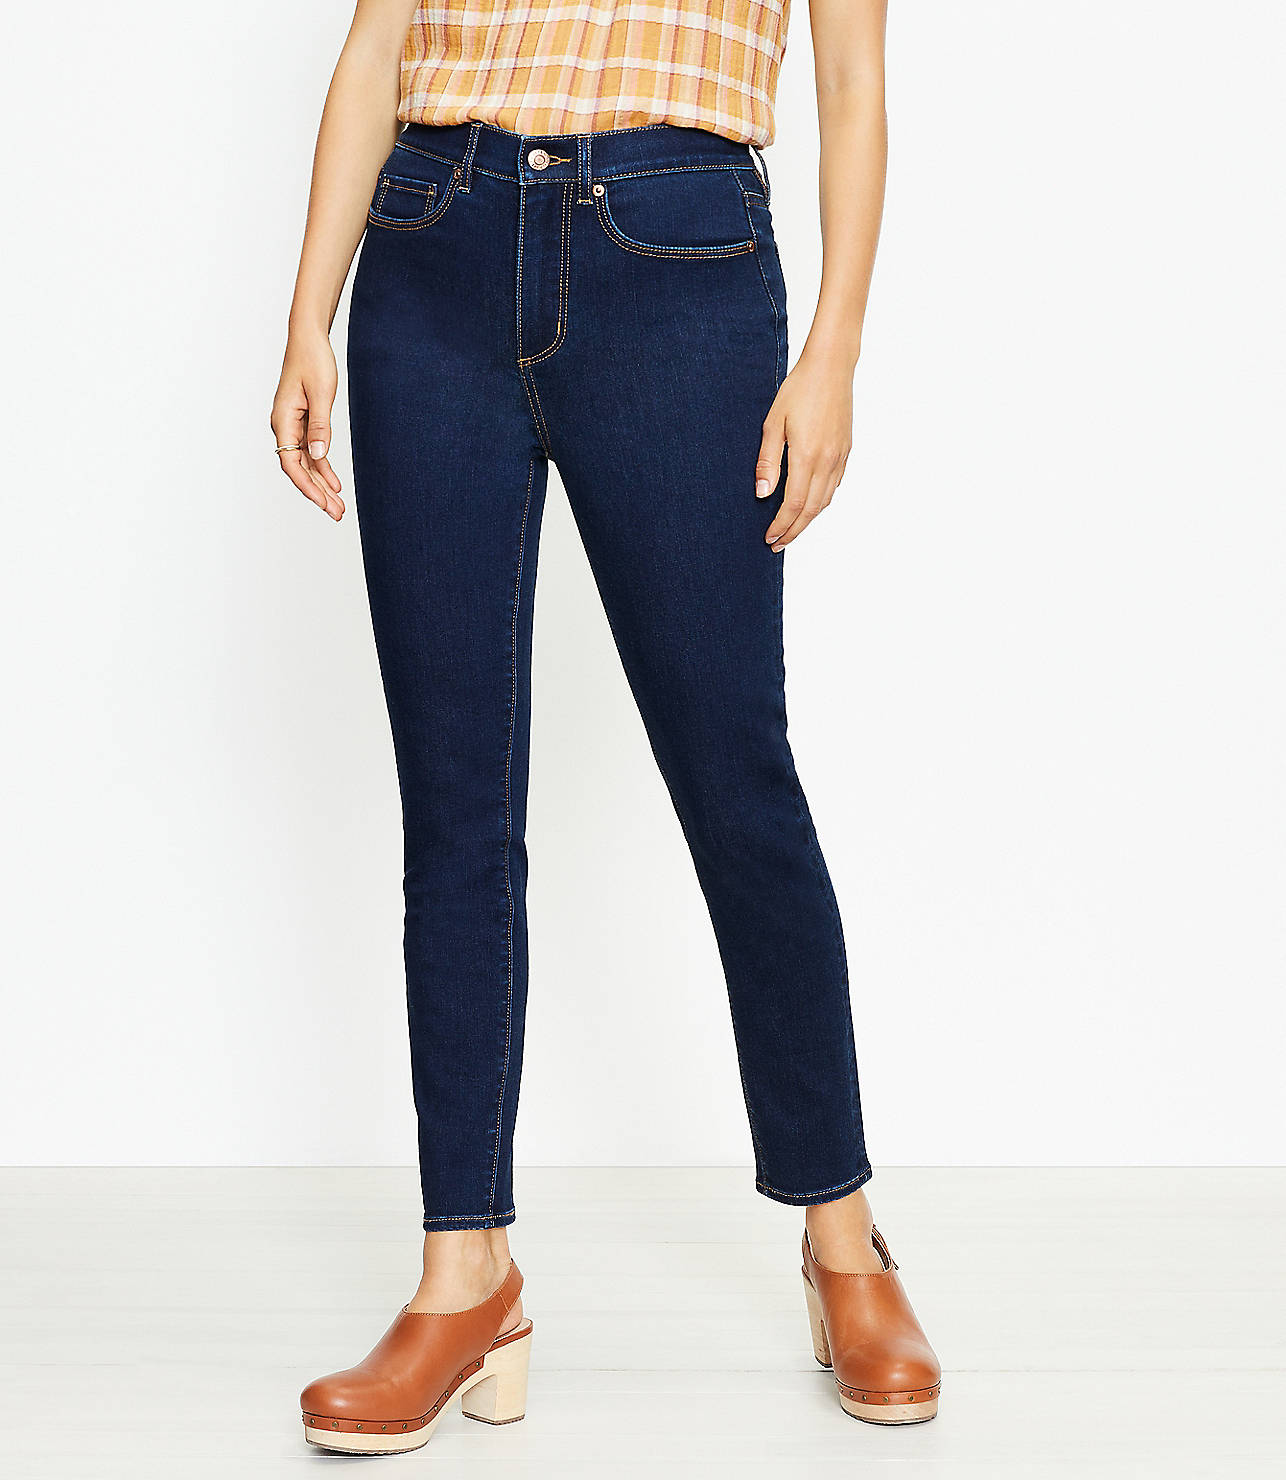 Petite High Rise Skinny Jeans in Rinse Wash